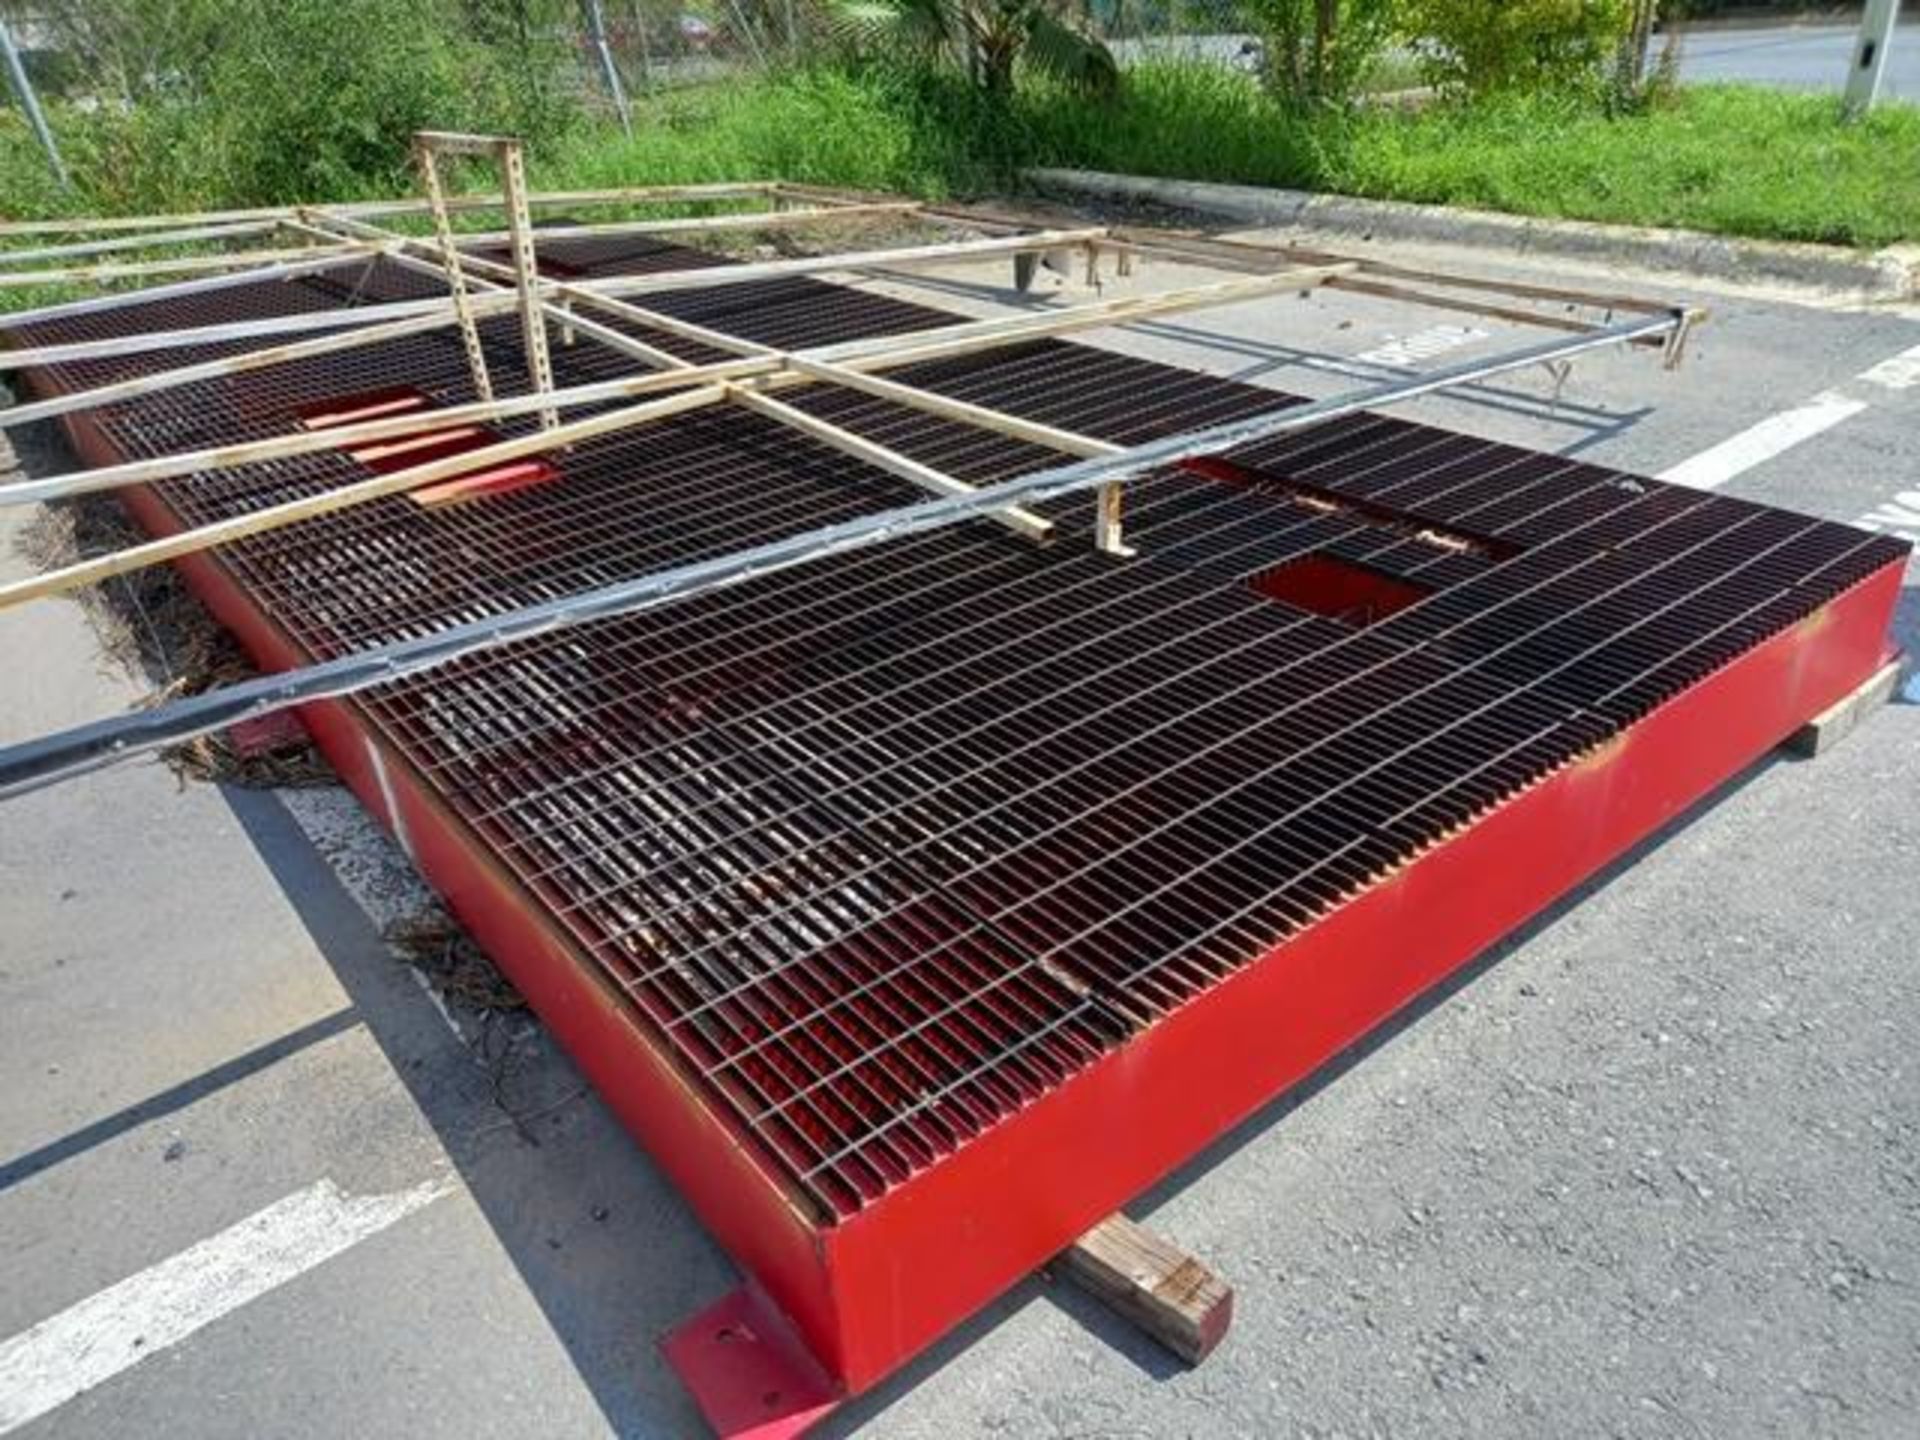 Exhibition Platform Tubular Structure and Grids, Dimensions: 6 M. Long x 2.4 M. Wide (Location: